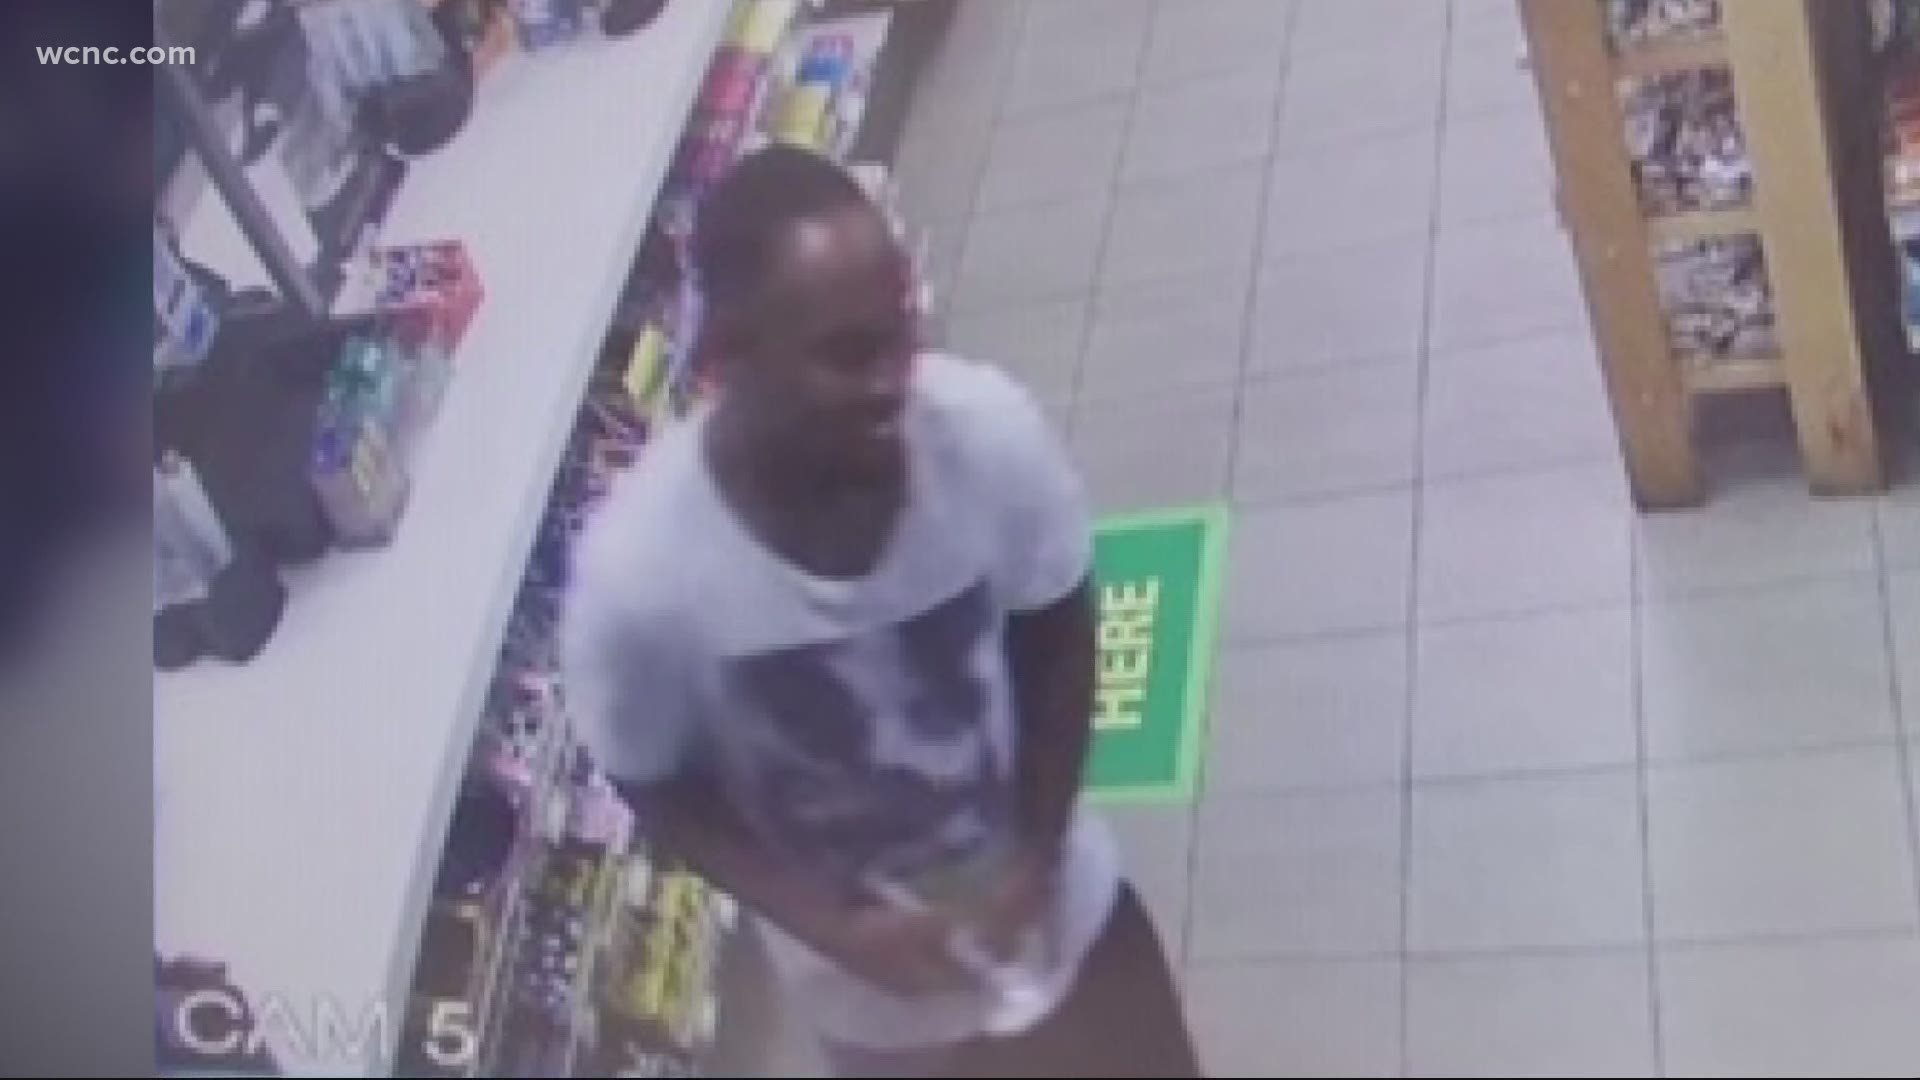 Police say he robbed the BP location at gunpoint. Now, police are helping the public will help identify him.